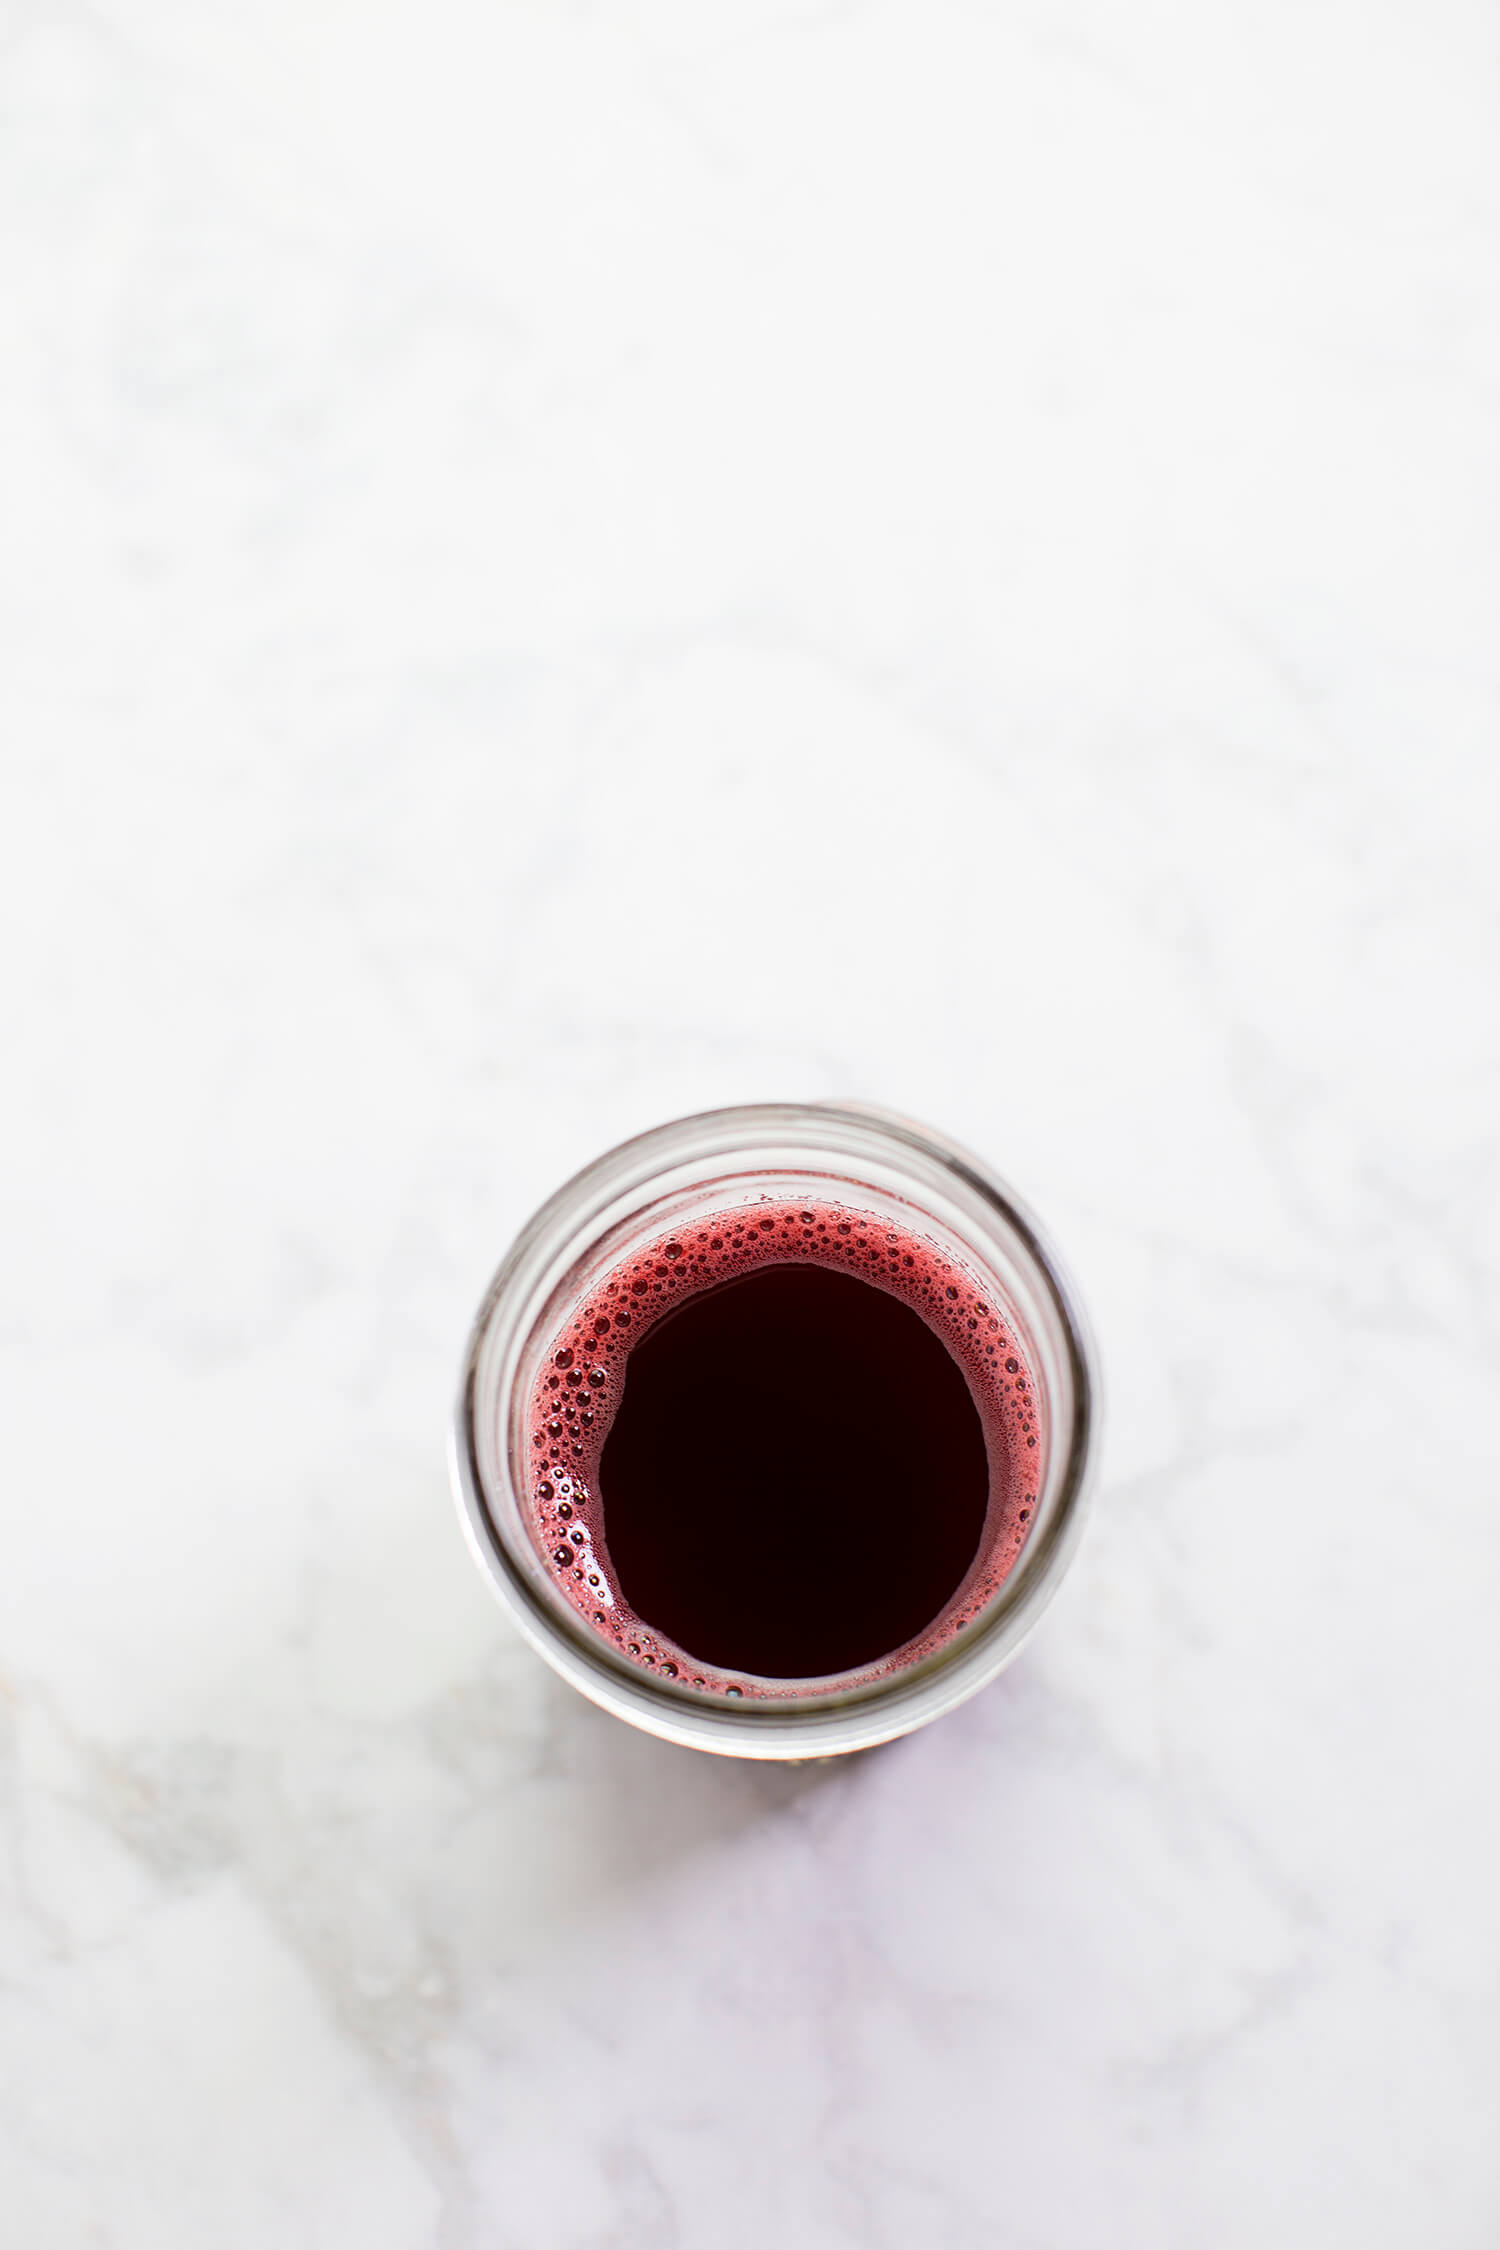 How to make beet juice without a juicer